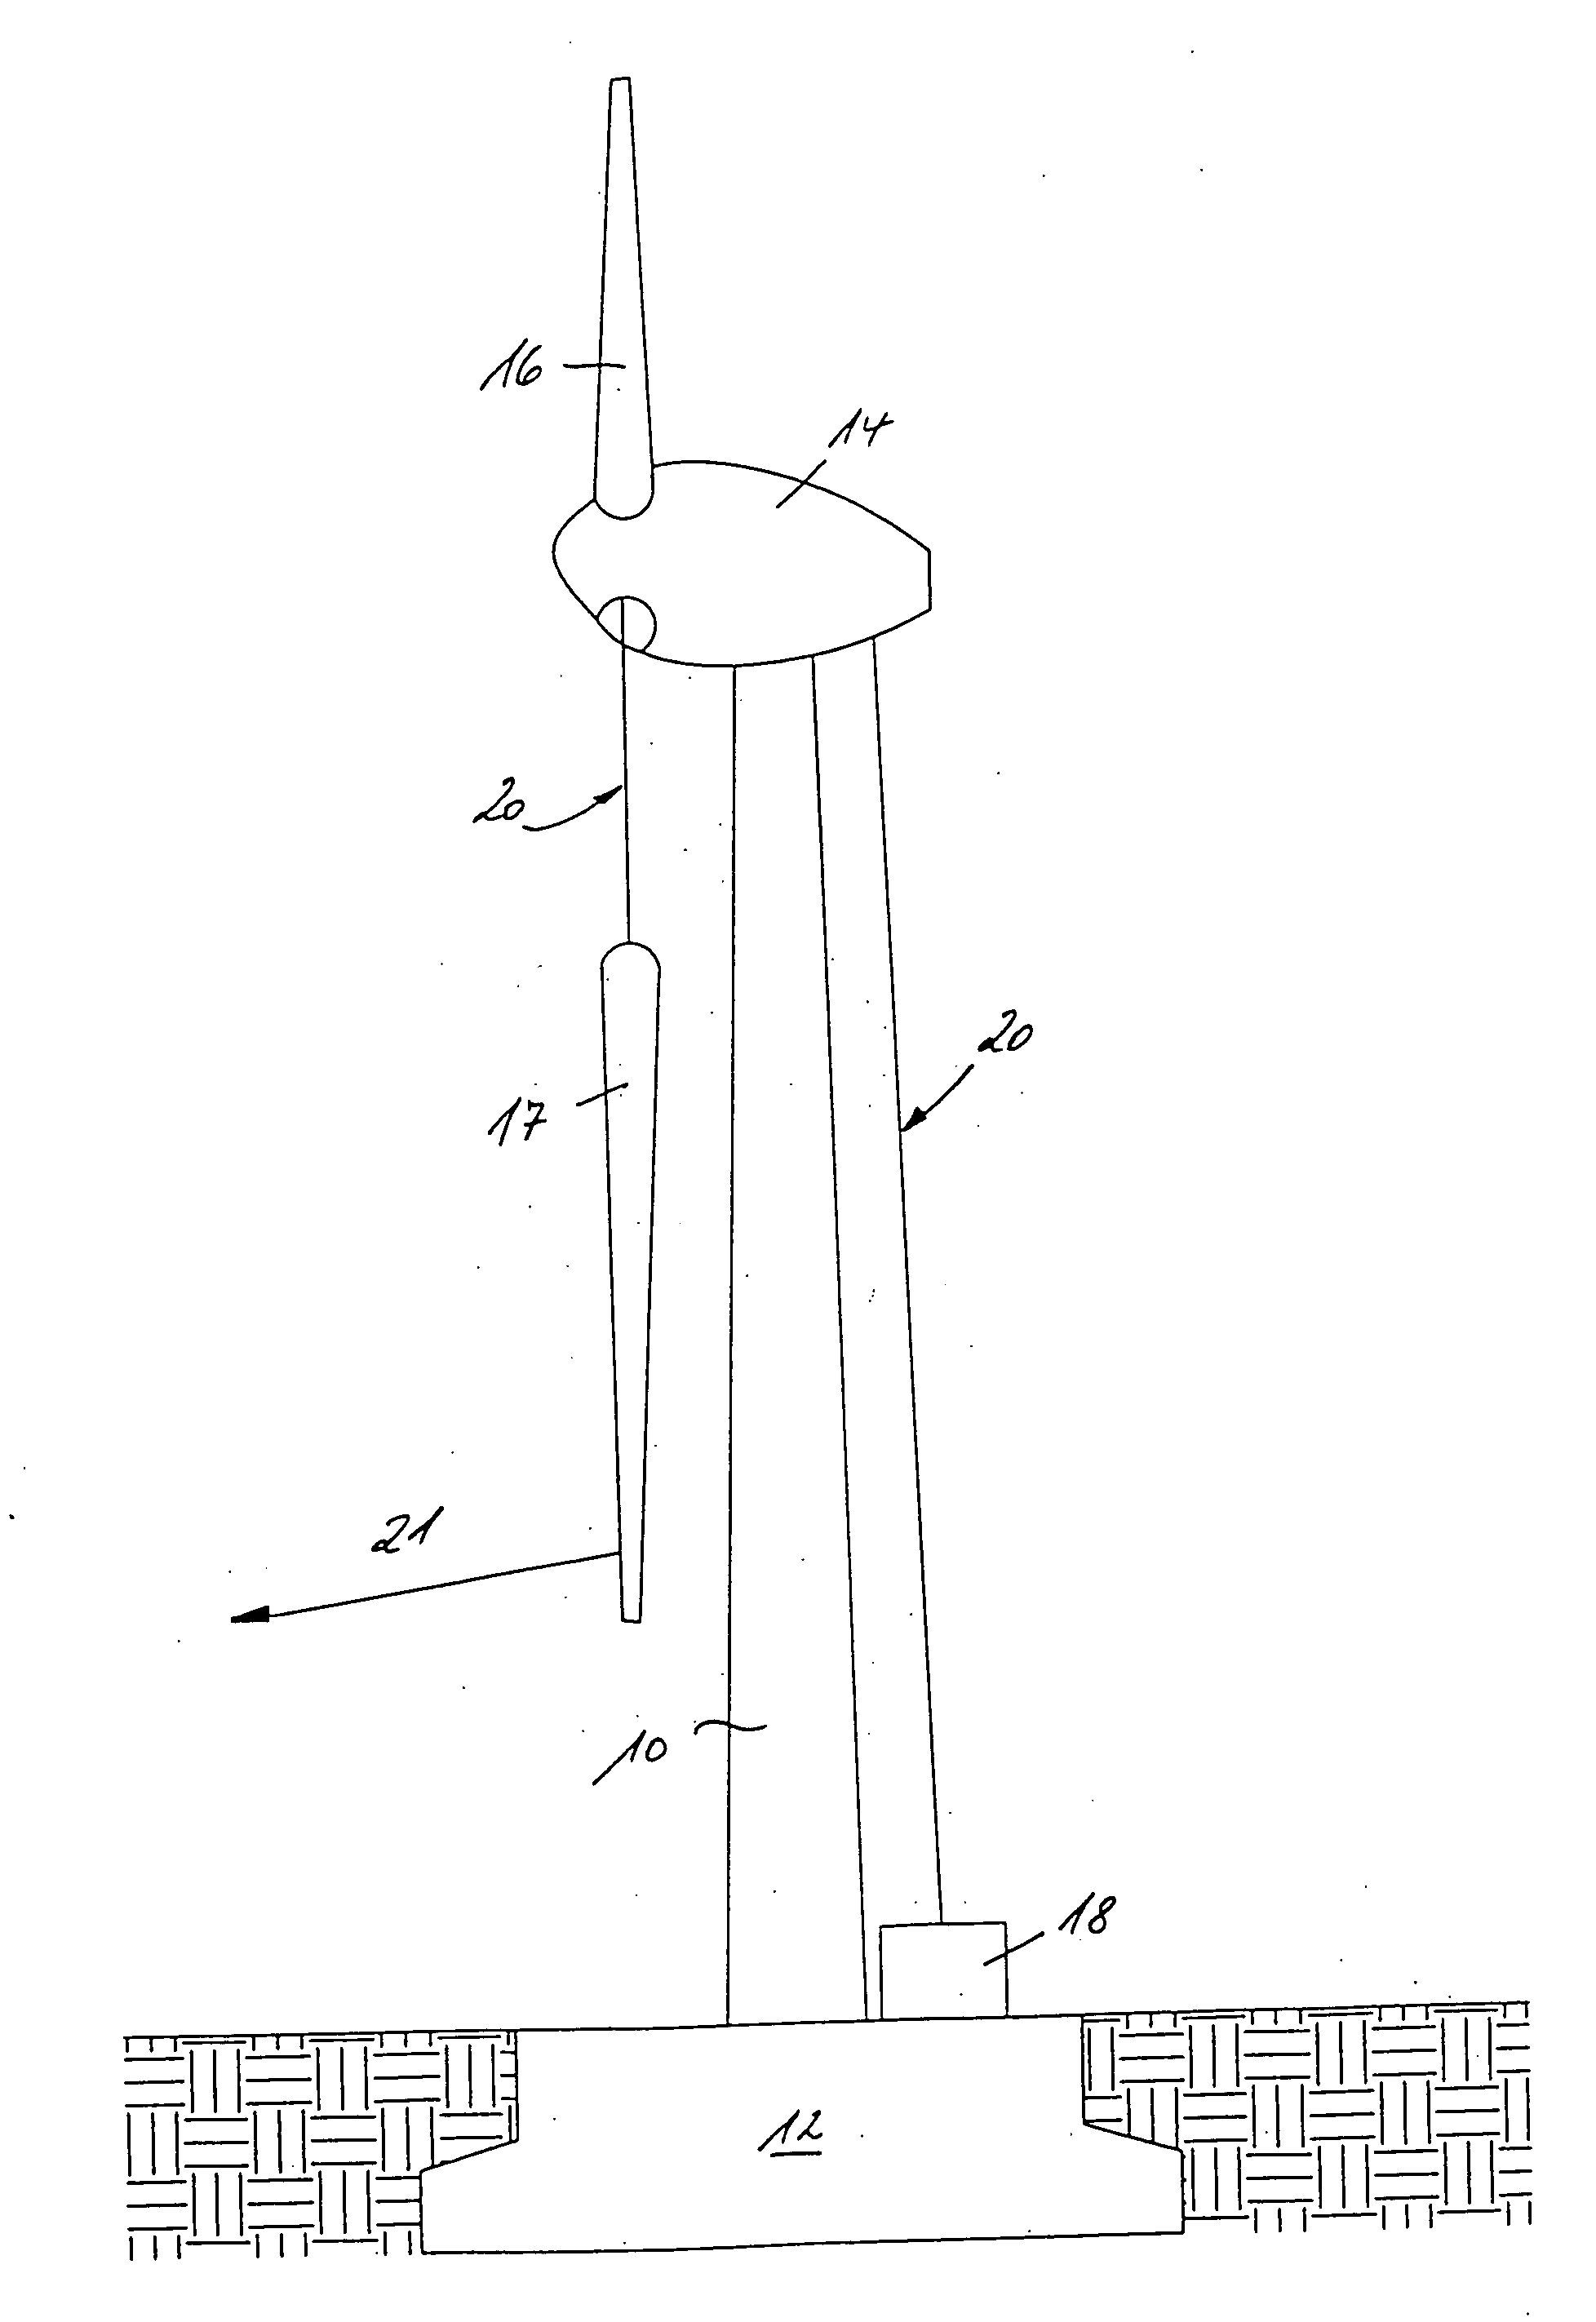 Method for assembling/dismounting components of a wind power plant